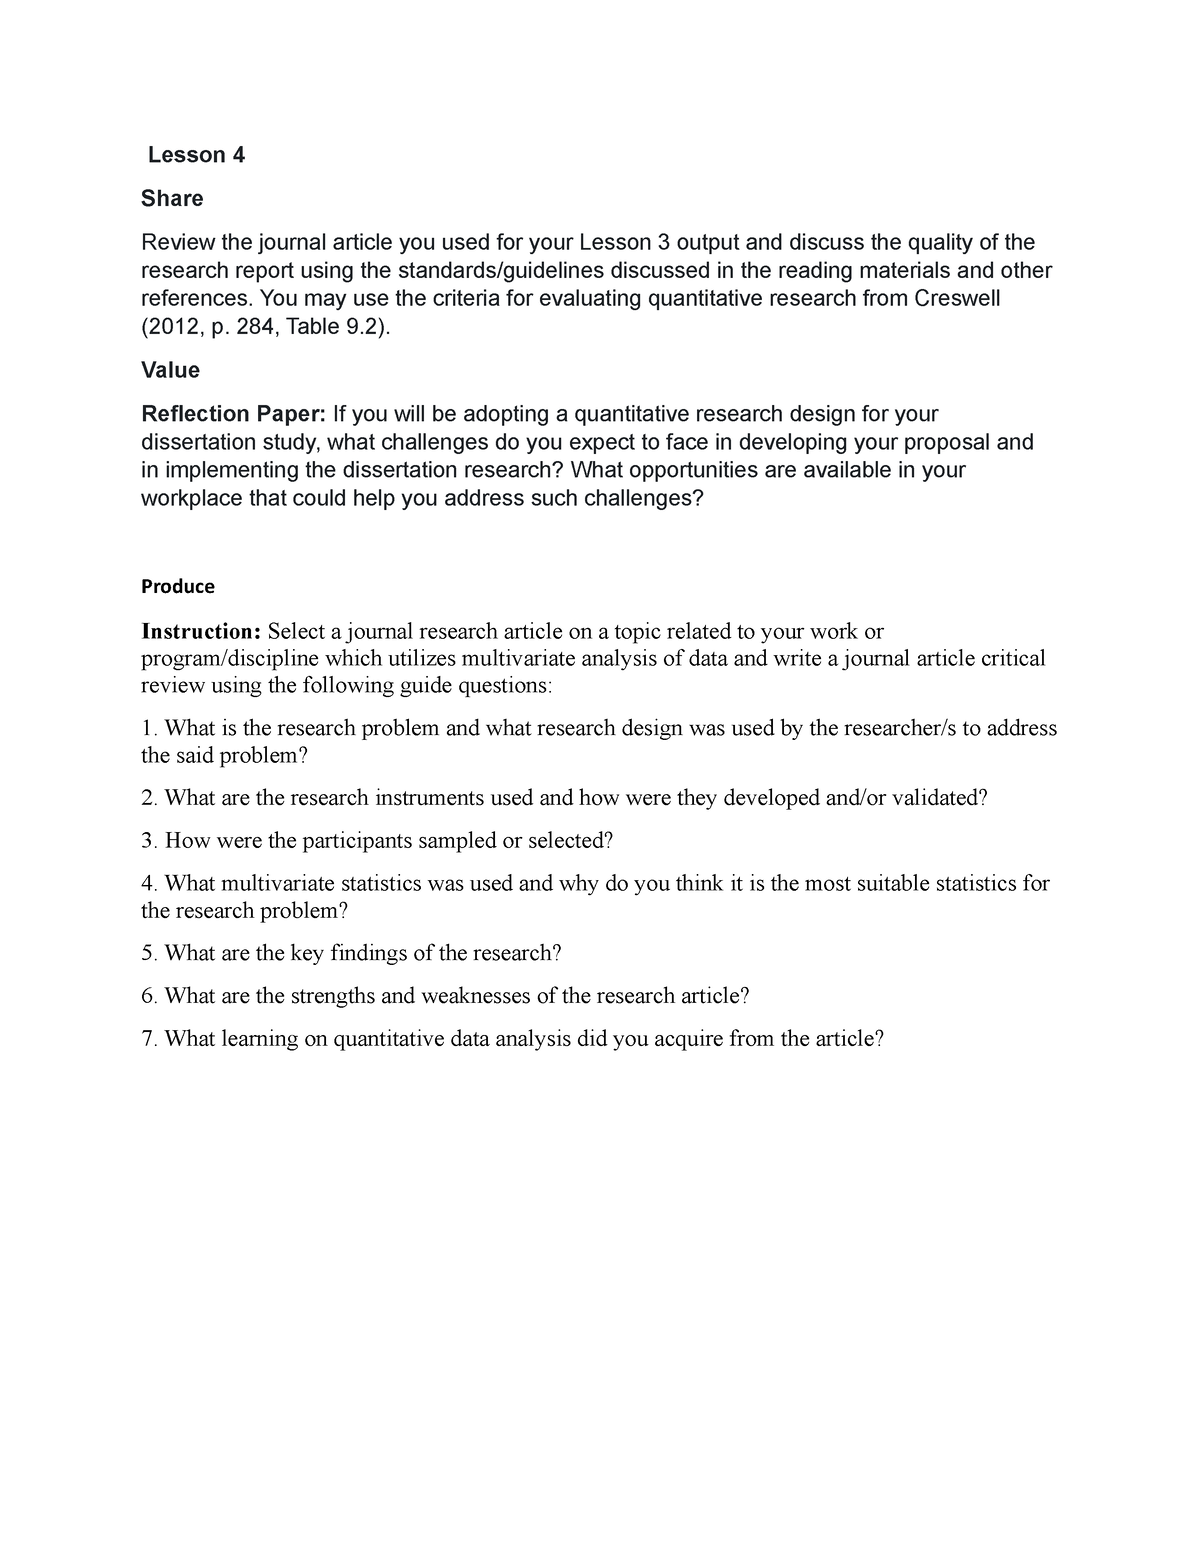 Lesson-4-S-V-P - Guide questions - Lesson 4 Share Review the journal ...